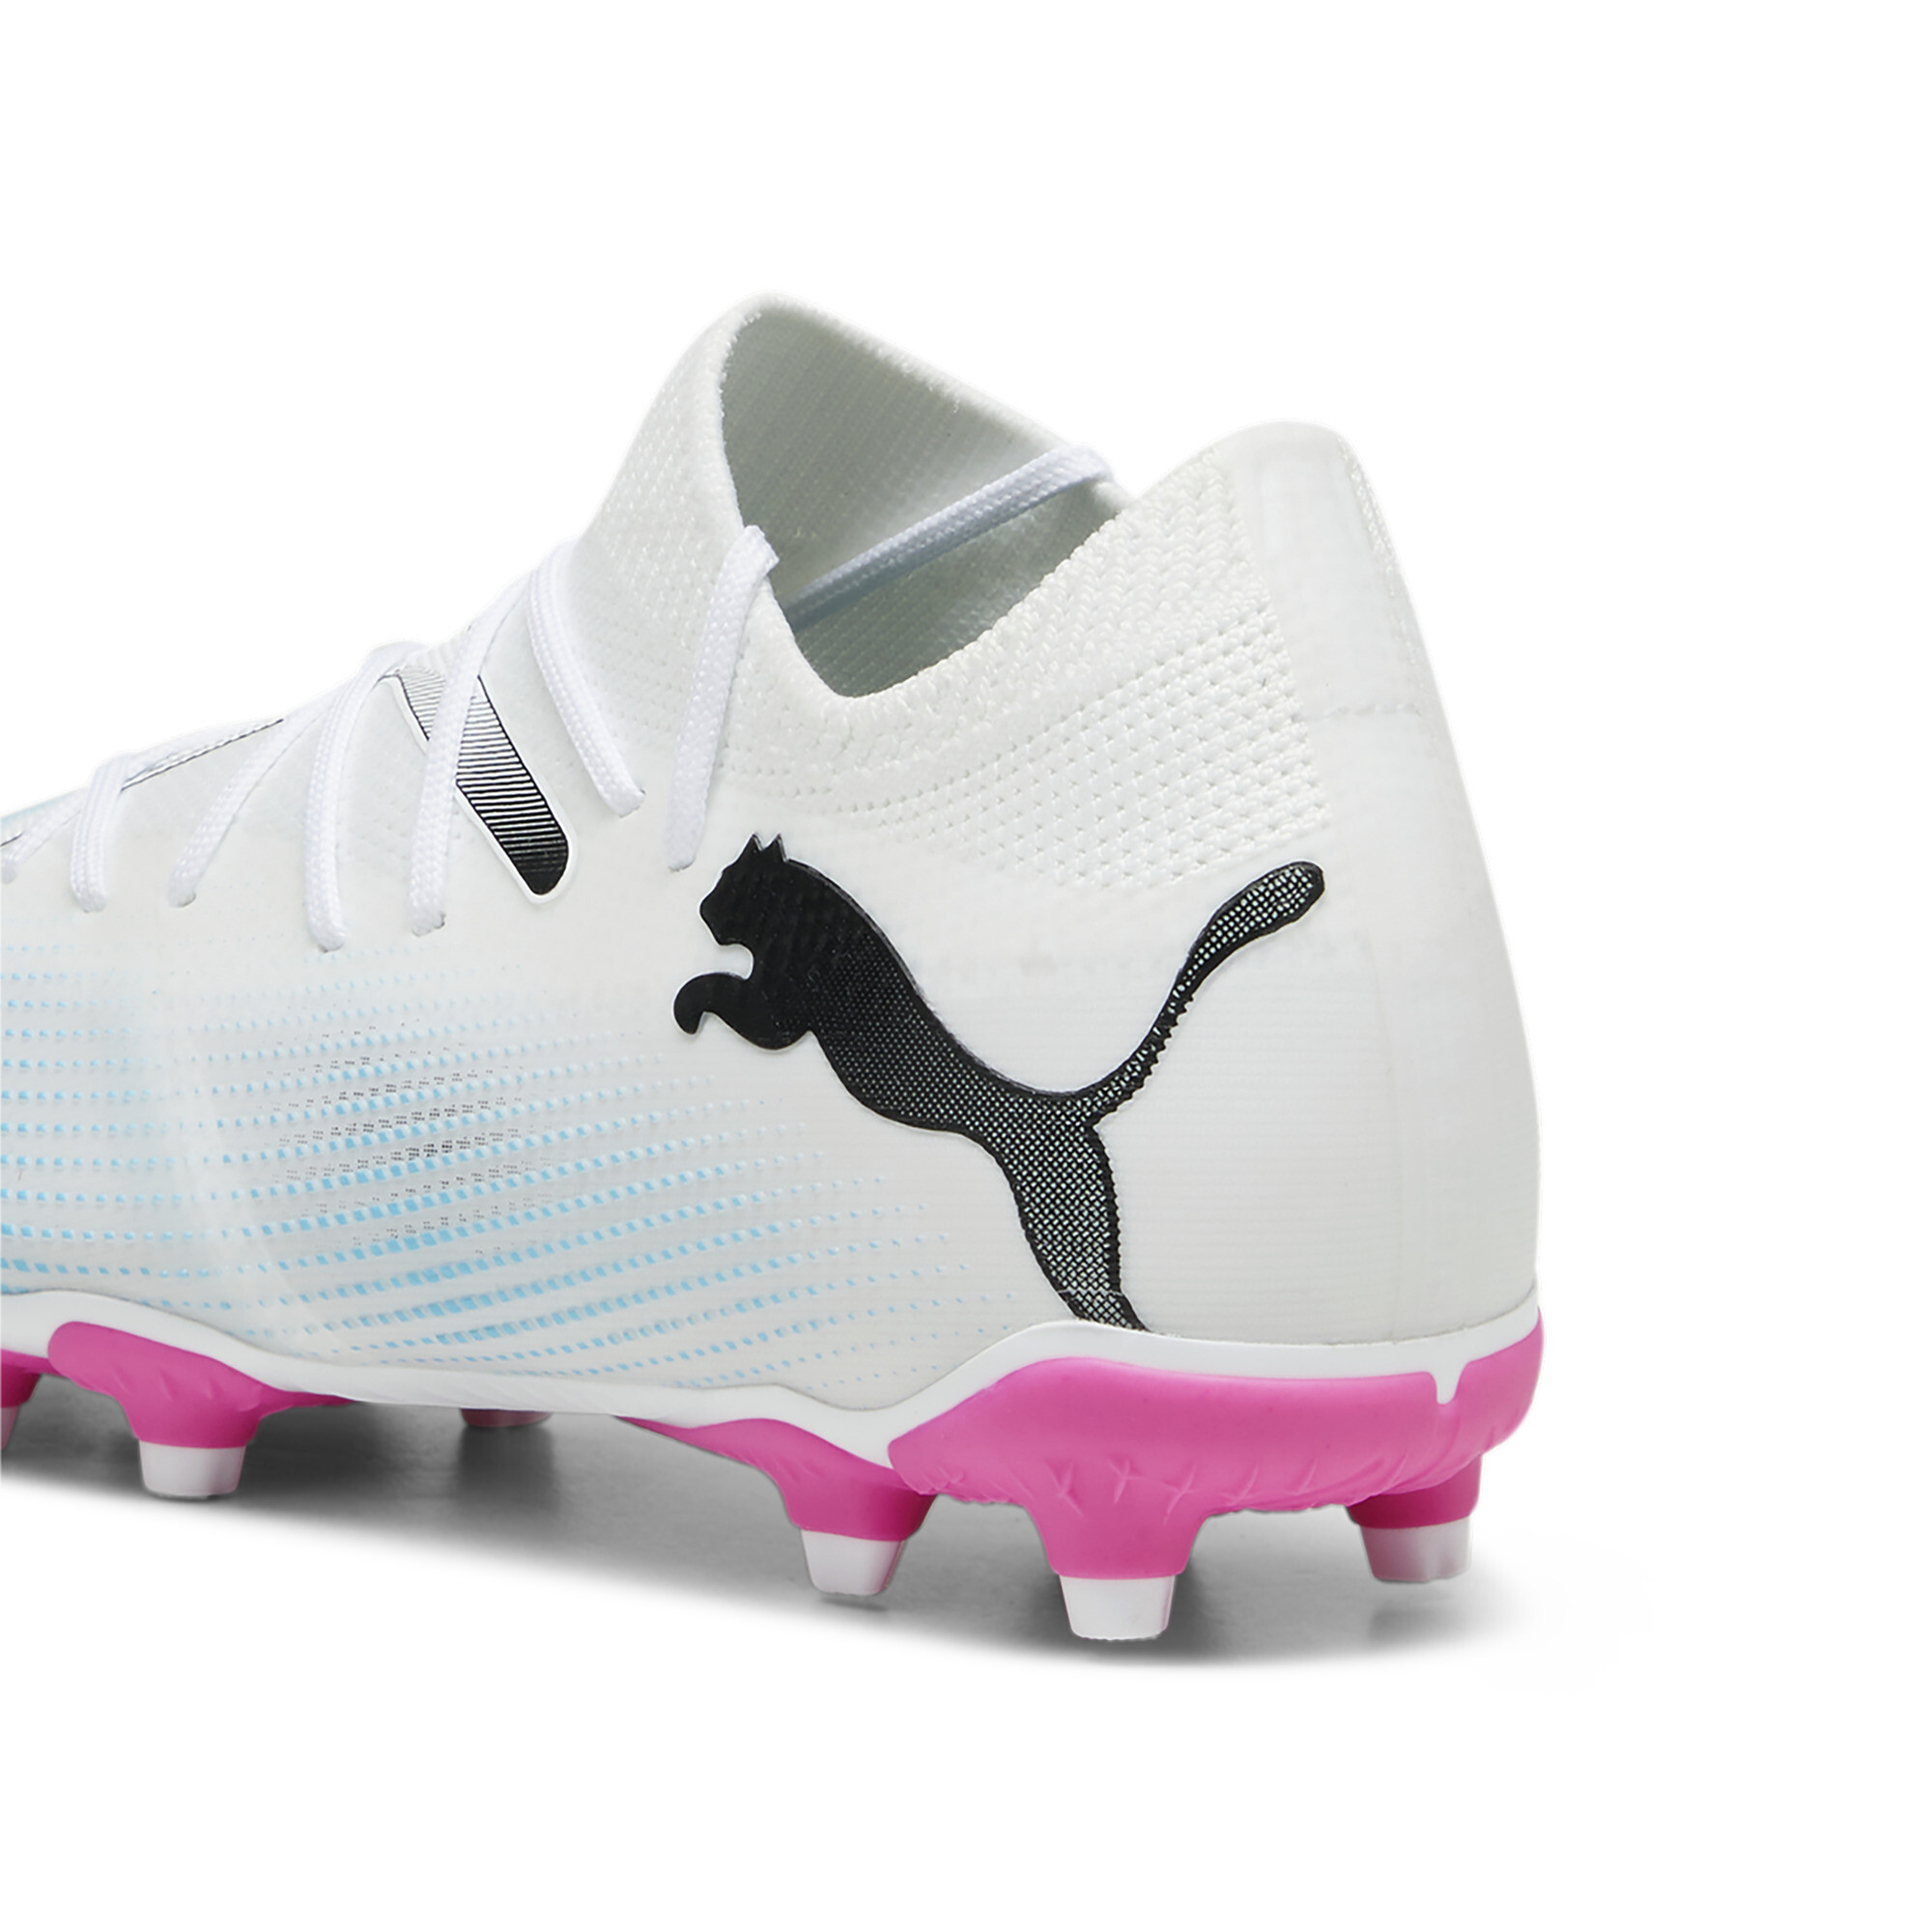 PUMA FUTURE 7 MATCH FG/AG Youth Football Boots In White/Pink, Size EU 37.5